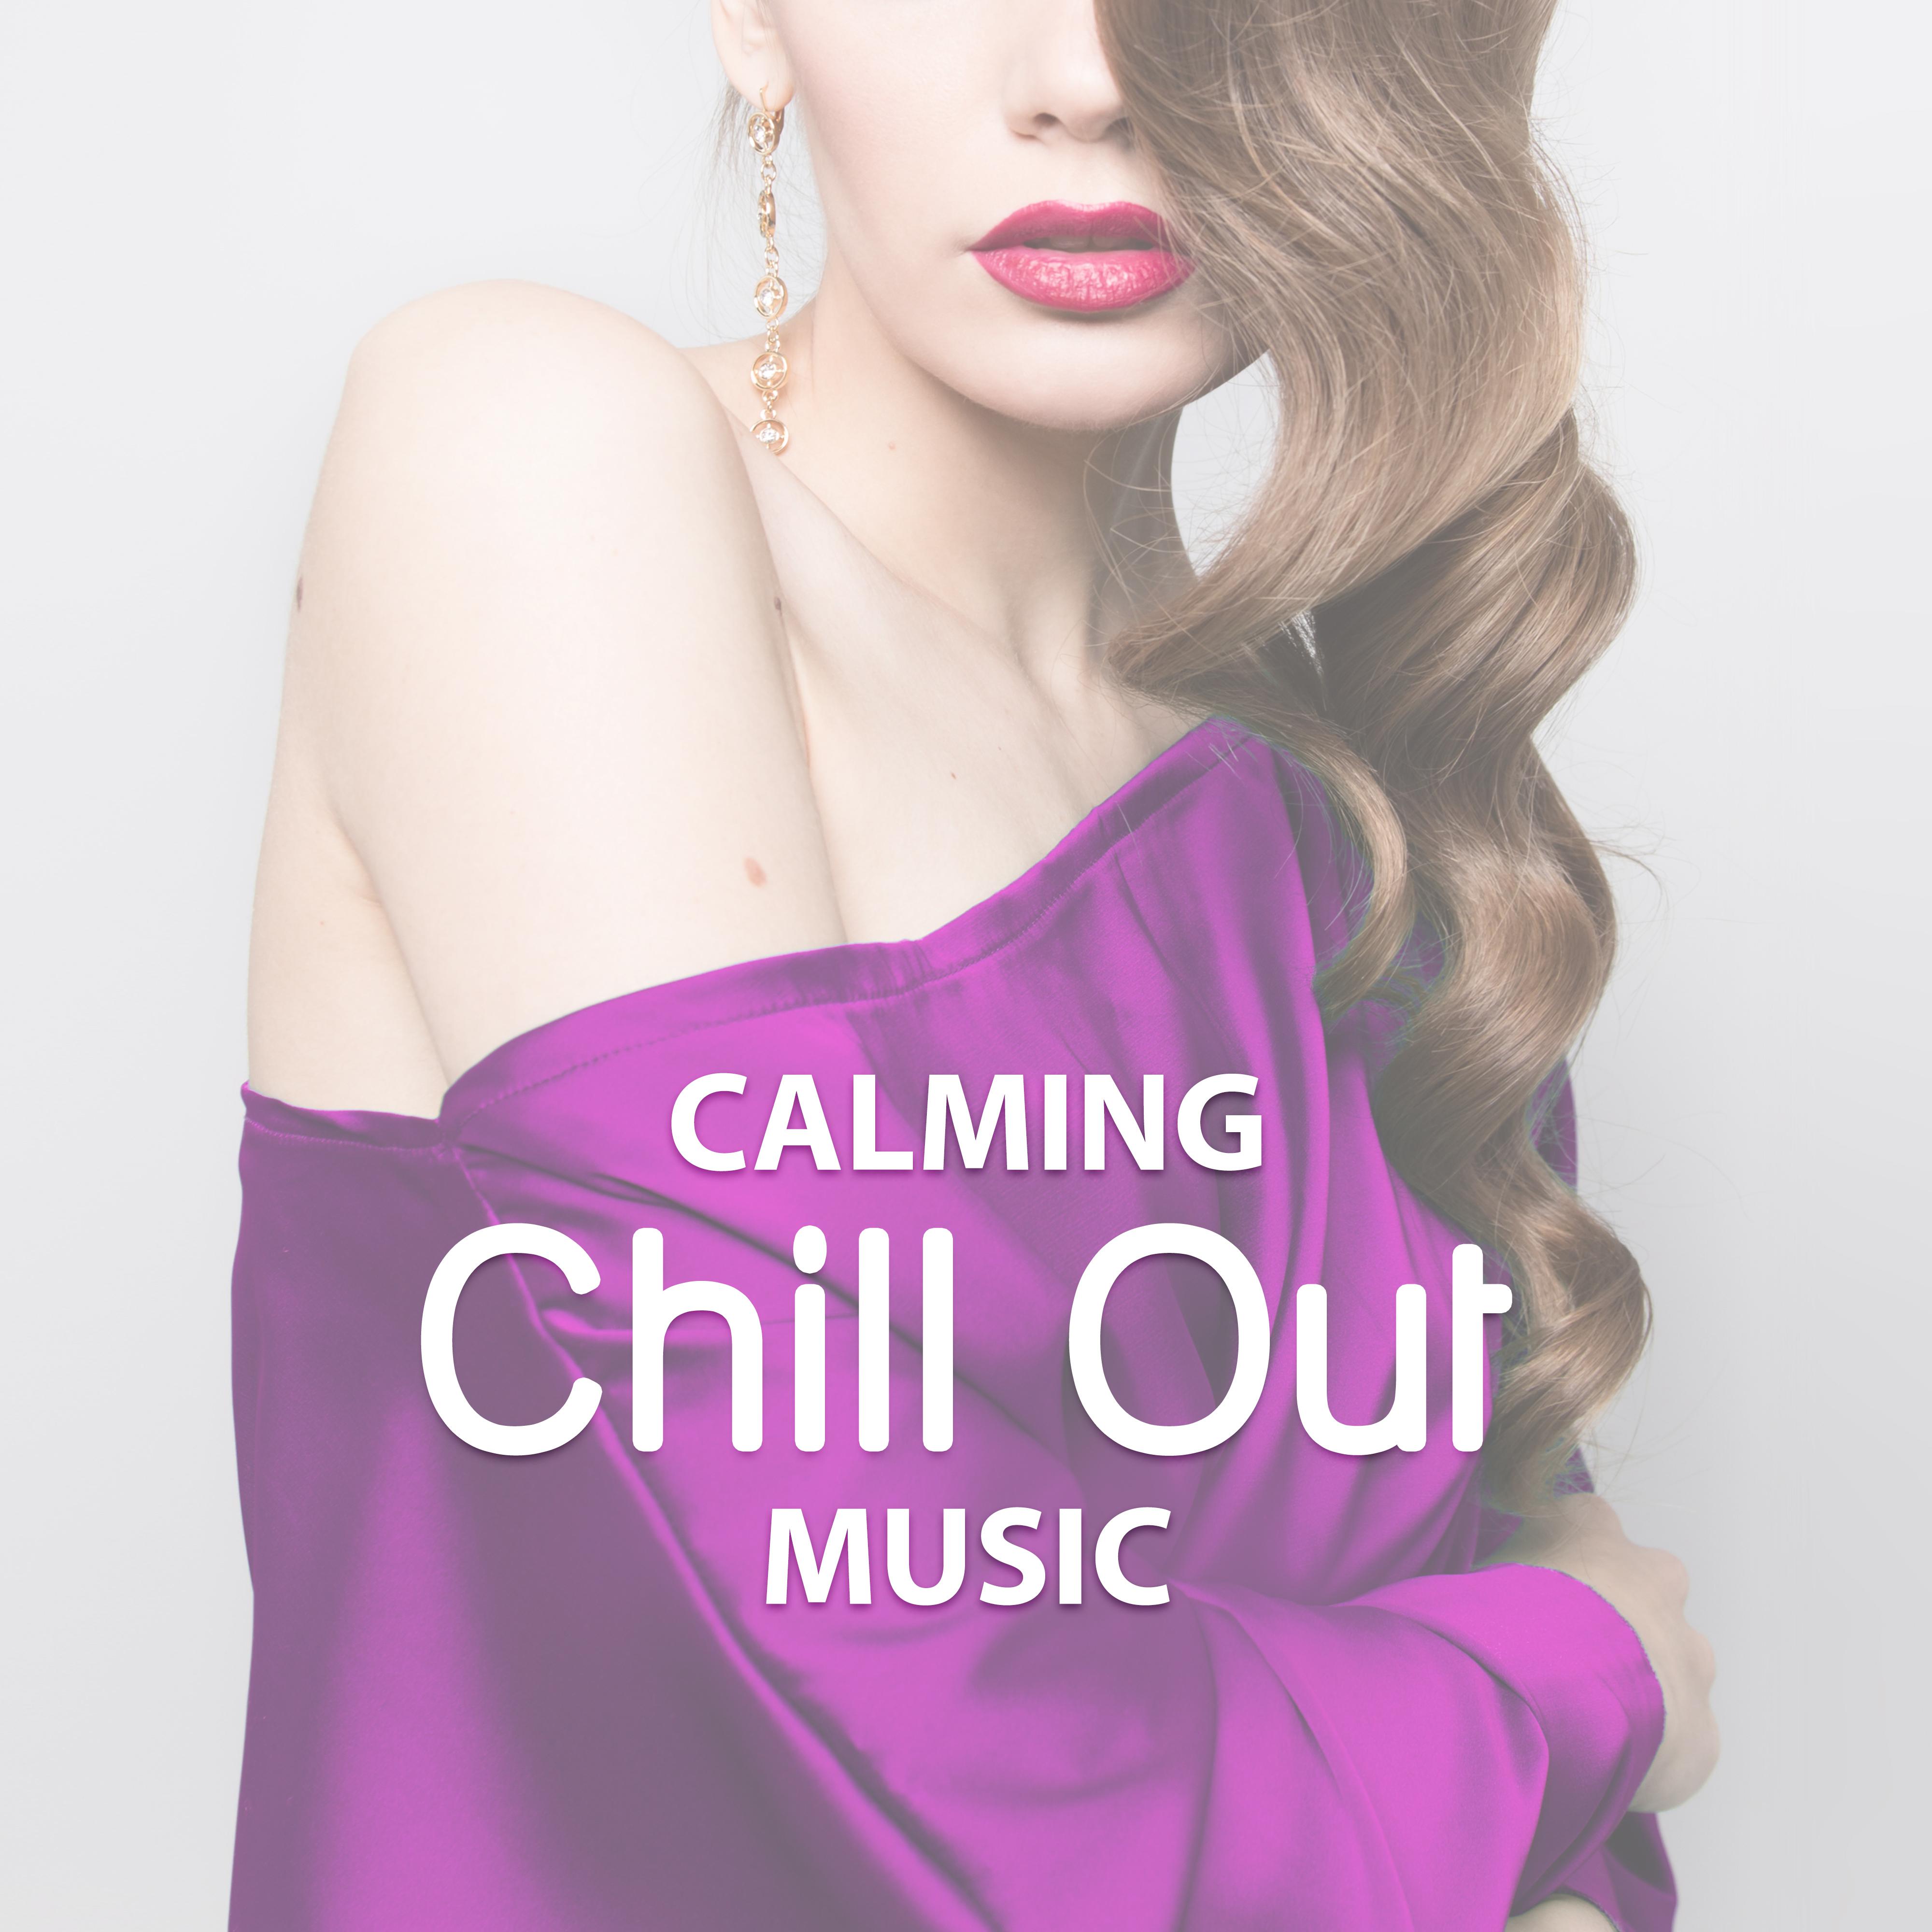 Calming Chill Out Music  Sensual Chill Music, Soft Music, Beach Lounge, Relaxing Summer